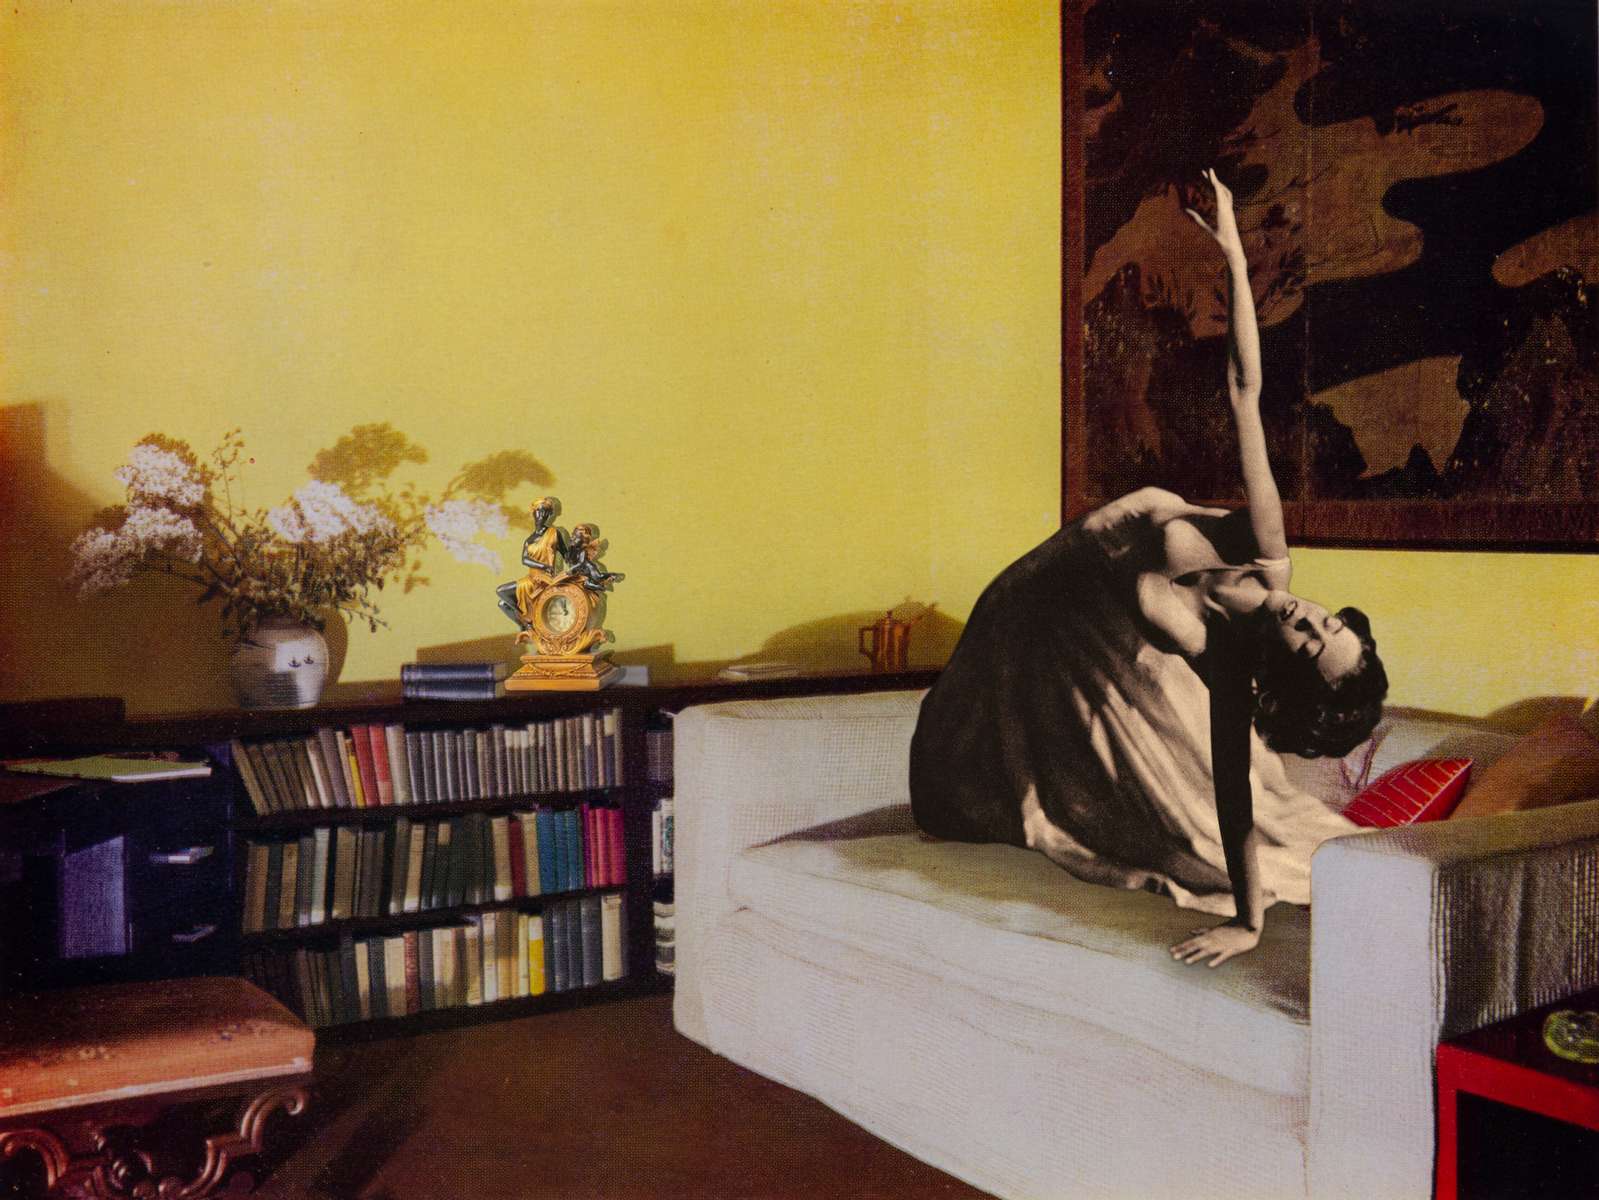 Mary Wigman poses on a large settee in a room with Chinese yellow varnished walls. Behind Mary is an 18th century Japanese screen in tones of gold and black. Design by Derek Patmore. (2018)